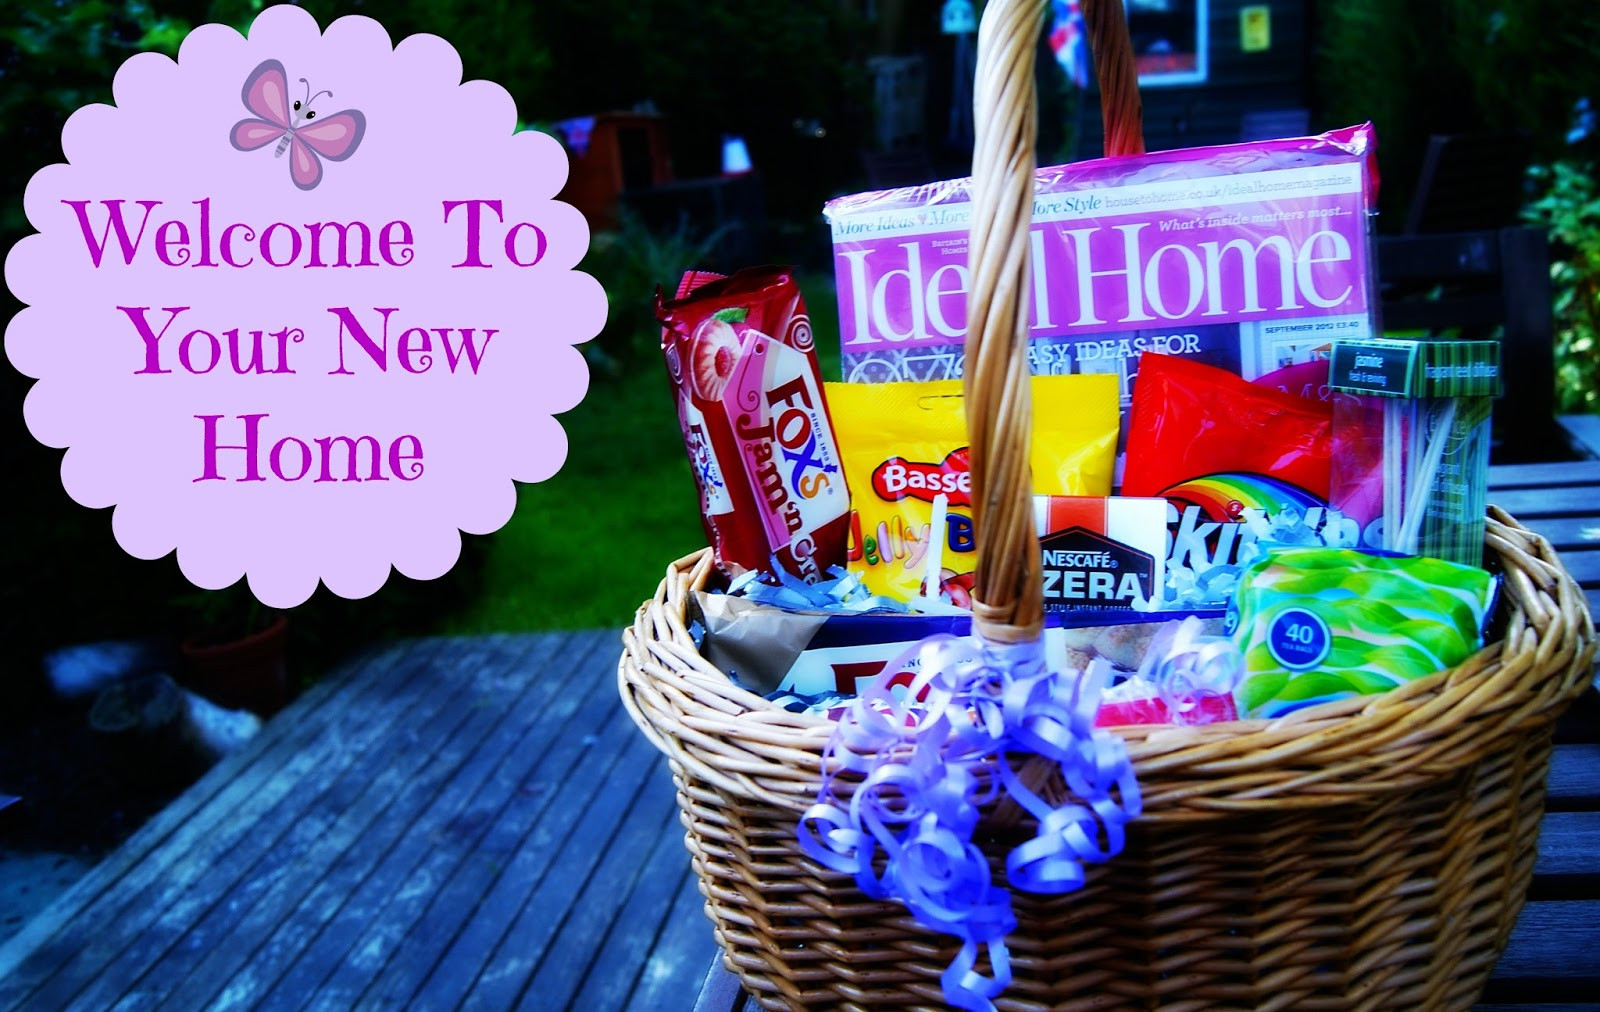 Welcome Home Gift Basket Ideas
 The Syders September 2013